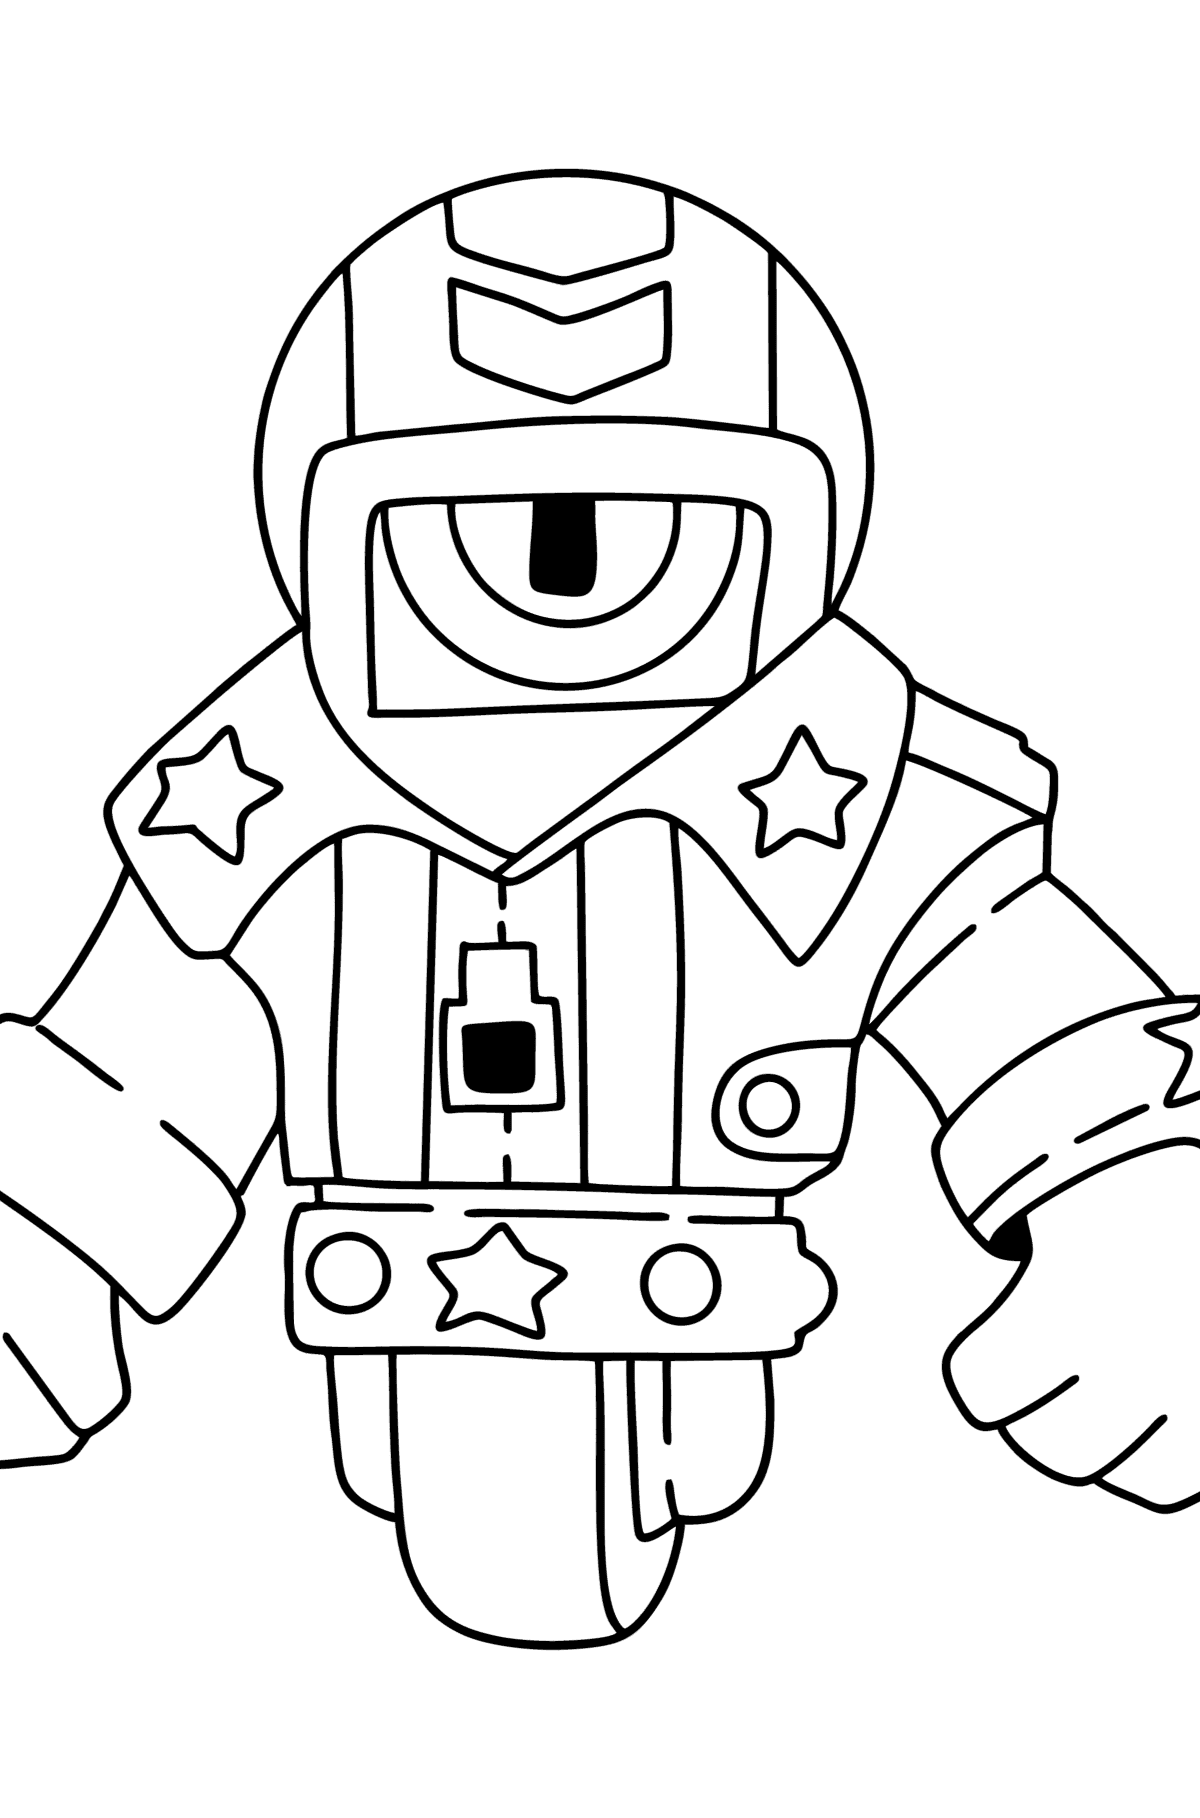 Brawl Stars Stu coloring page - Coloring Pages for Kids